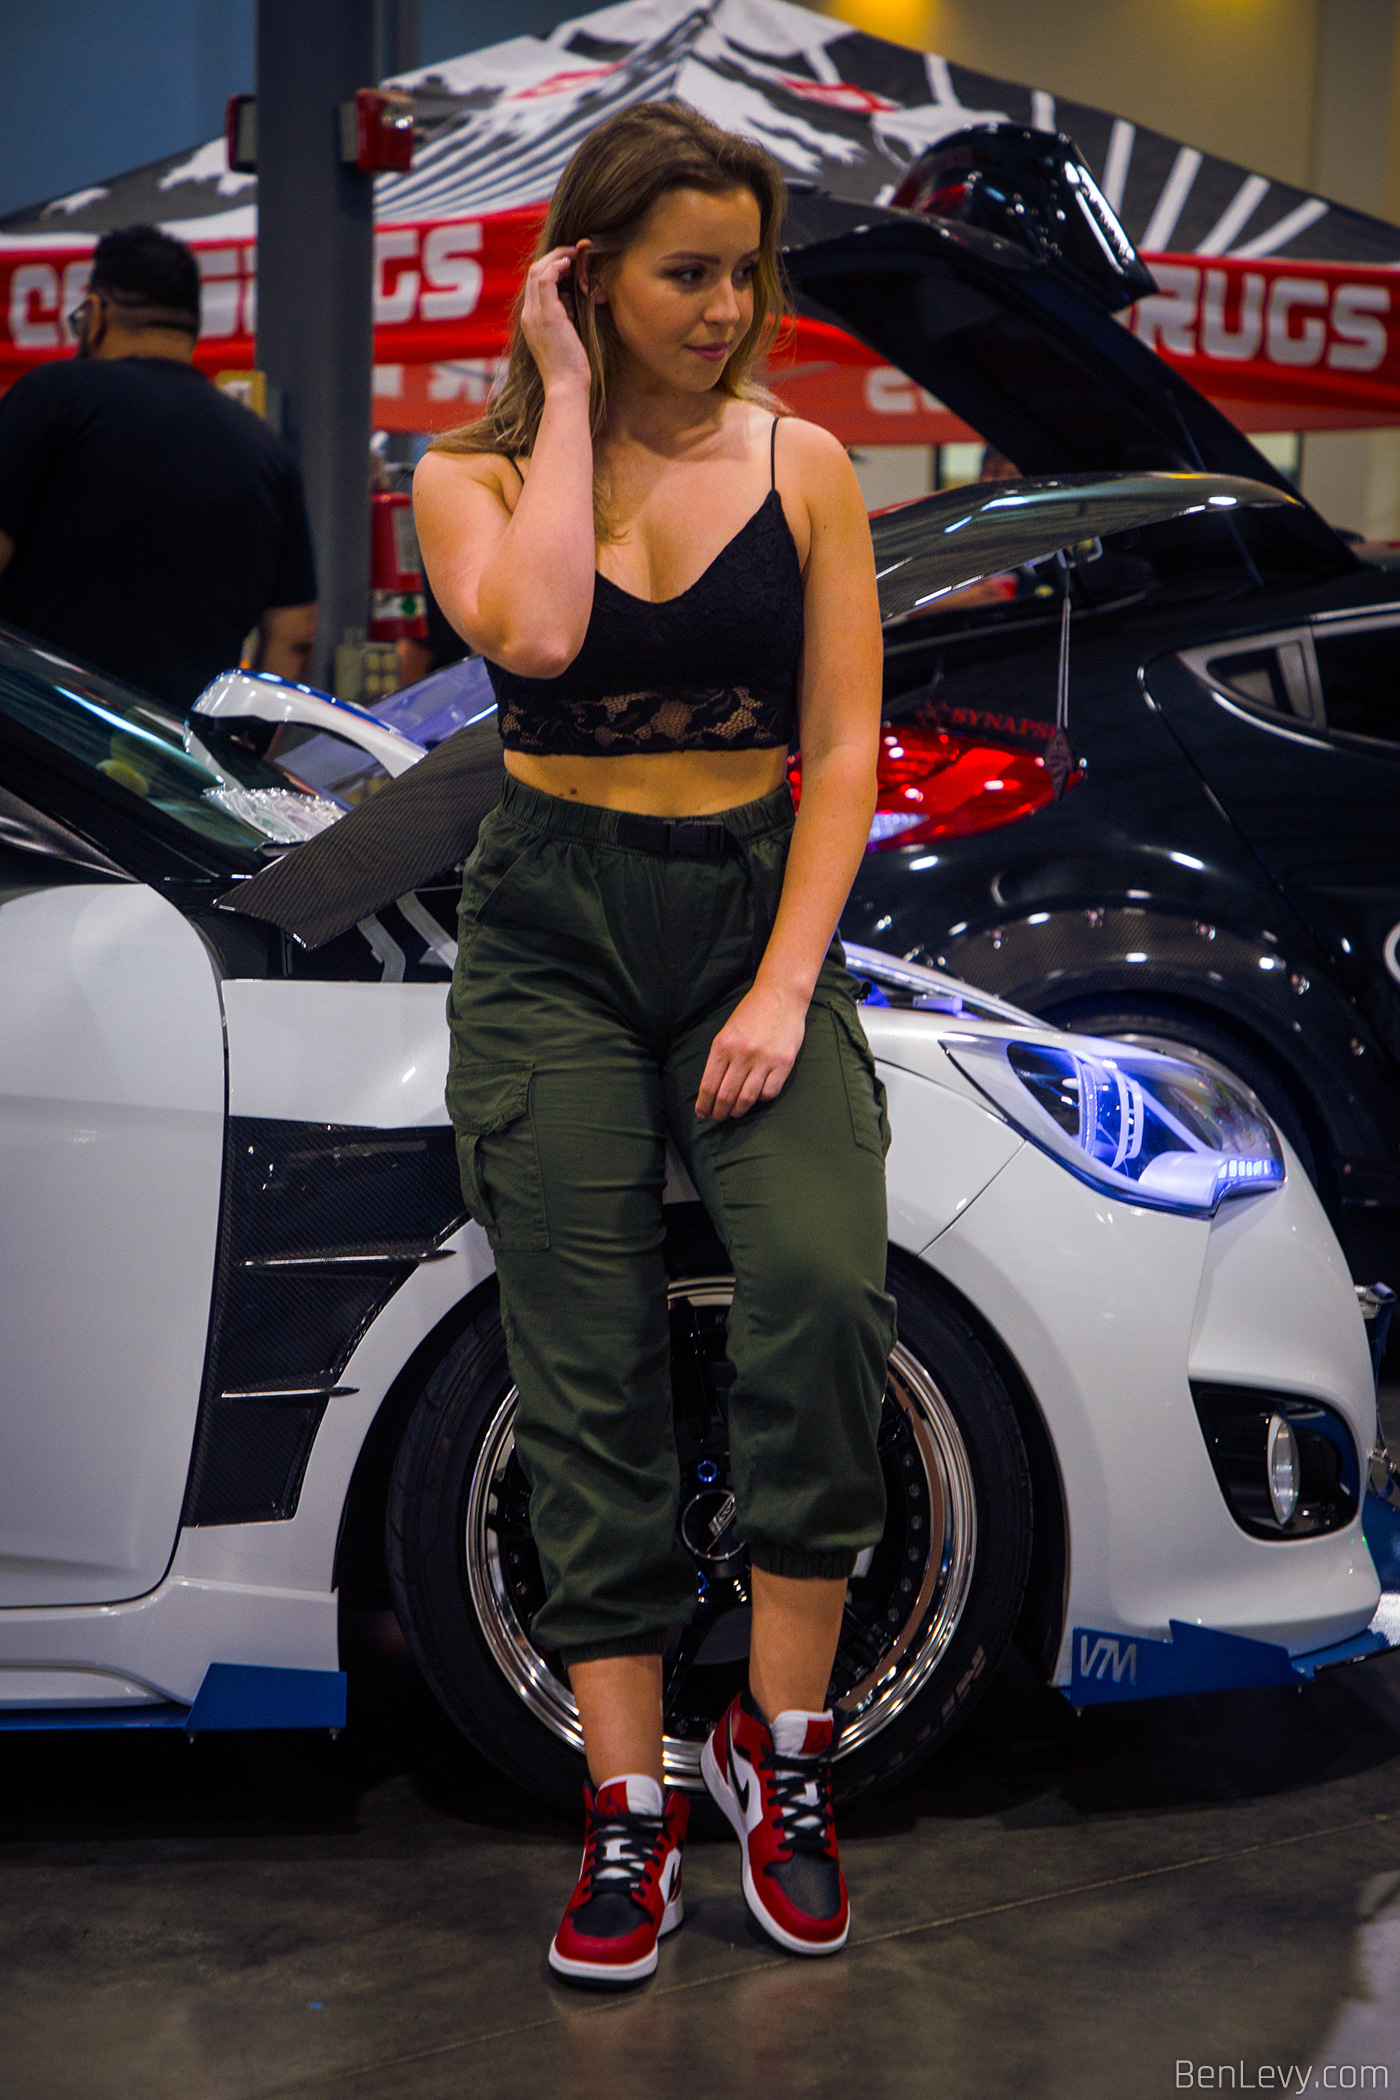 The Model Sarah with a Hyundai Veloster at Car Show